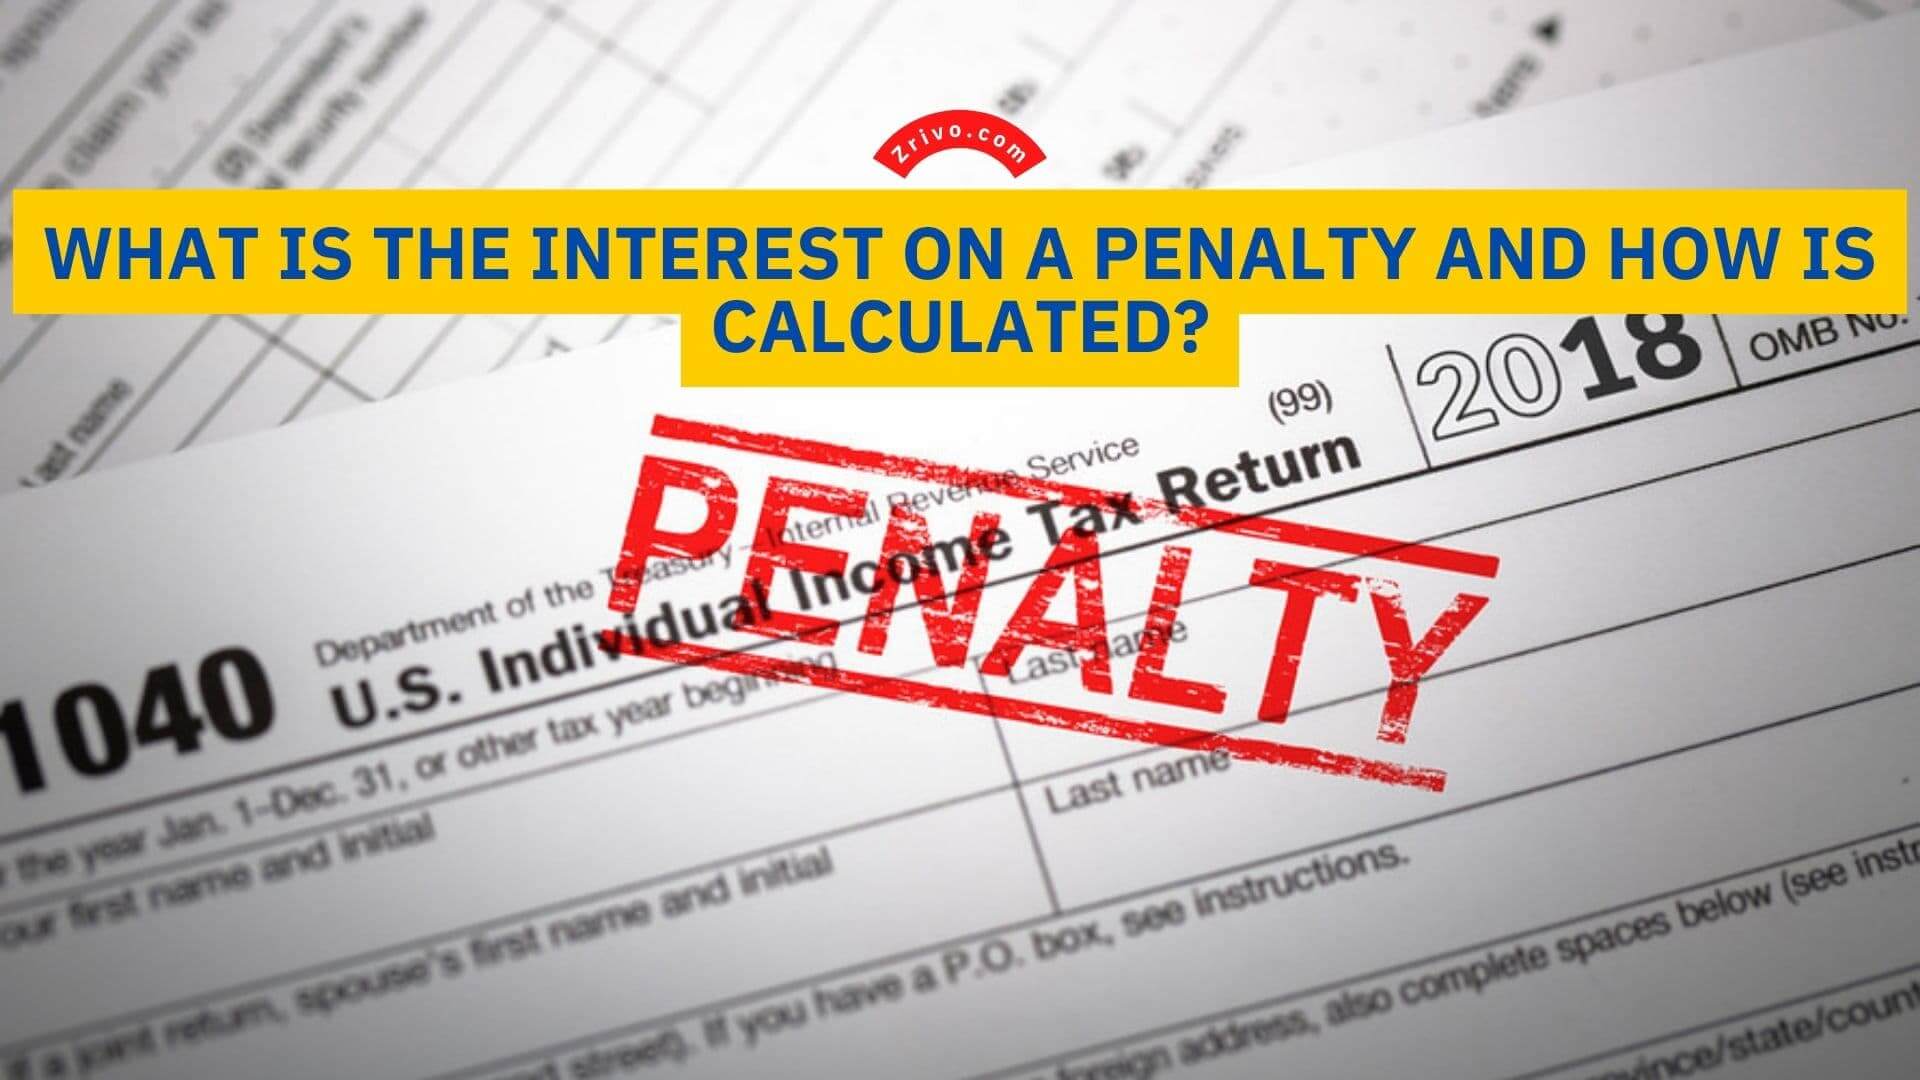 What Is the Interest on a Penalty and How Is Calculated?